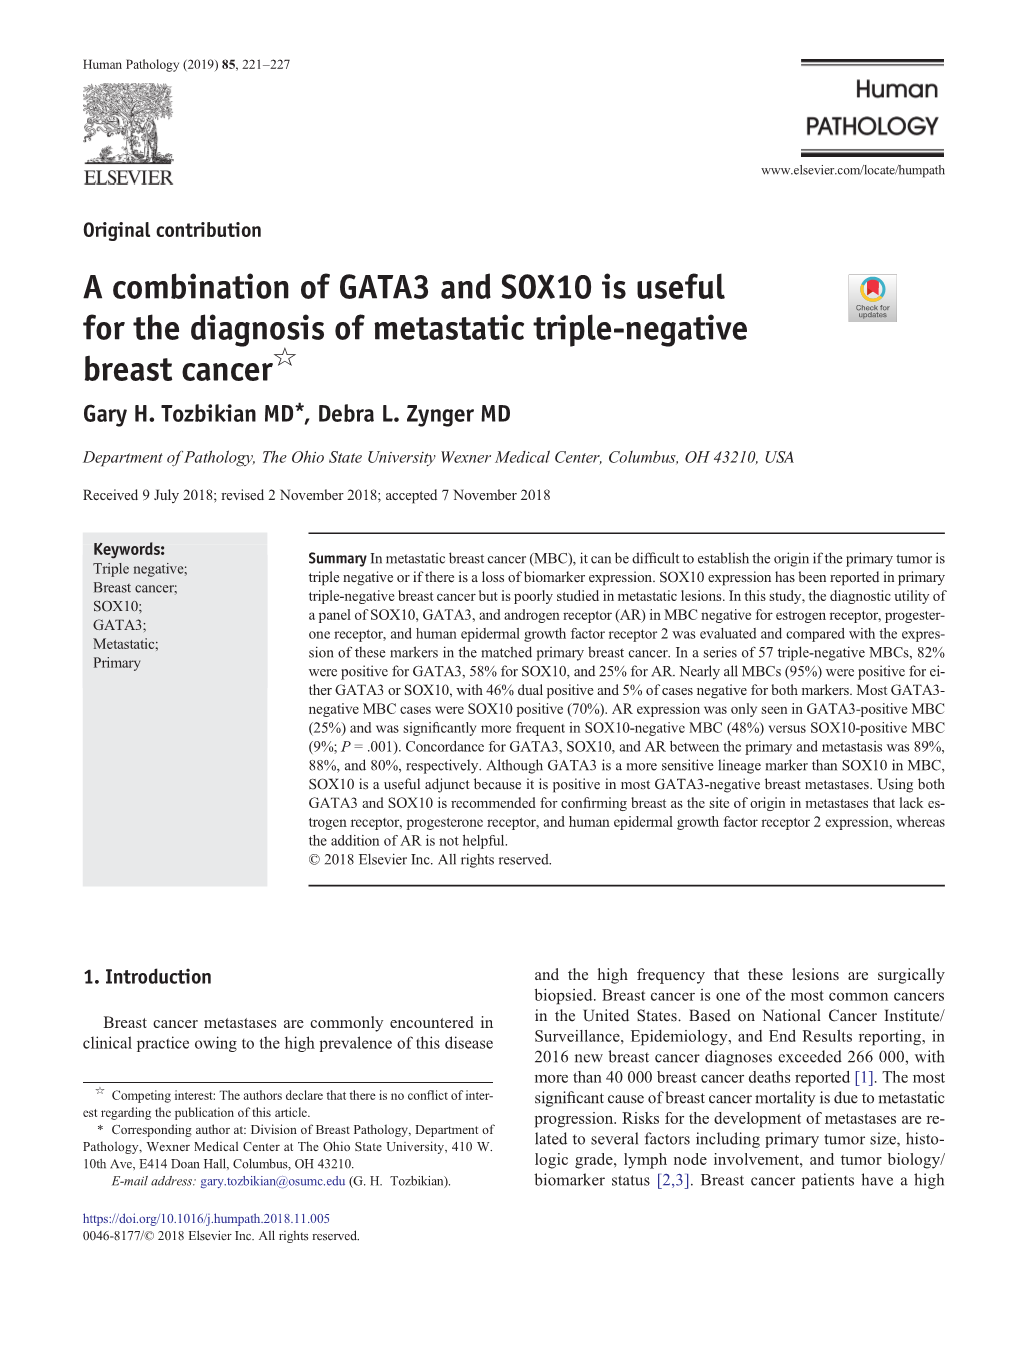 A Combination of GATA3 and SOX10 Is Useful for the Diagnosis of Metastatic Triple-Negative Breast Cancer☆ Gary H